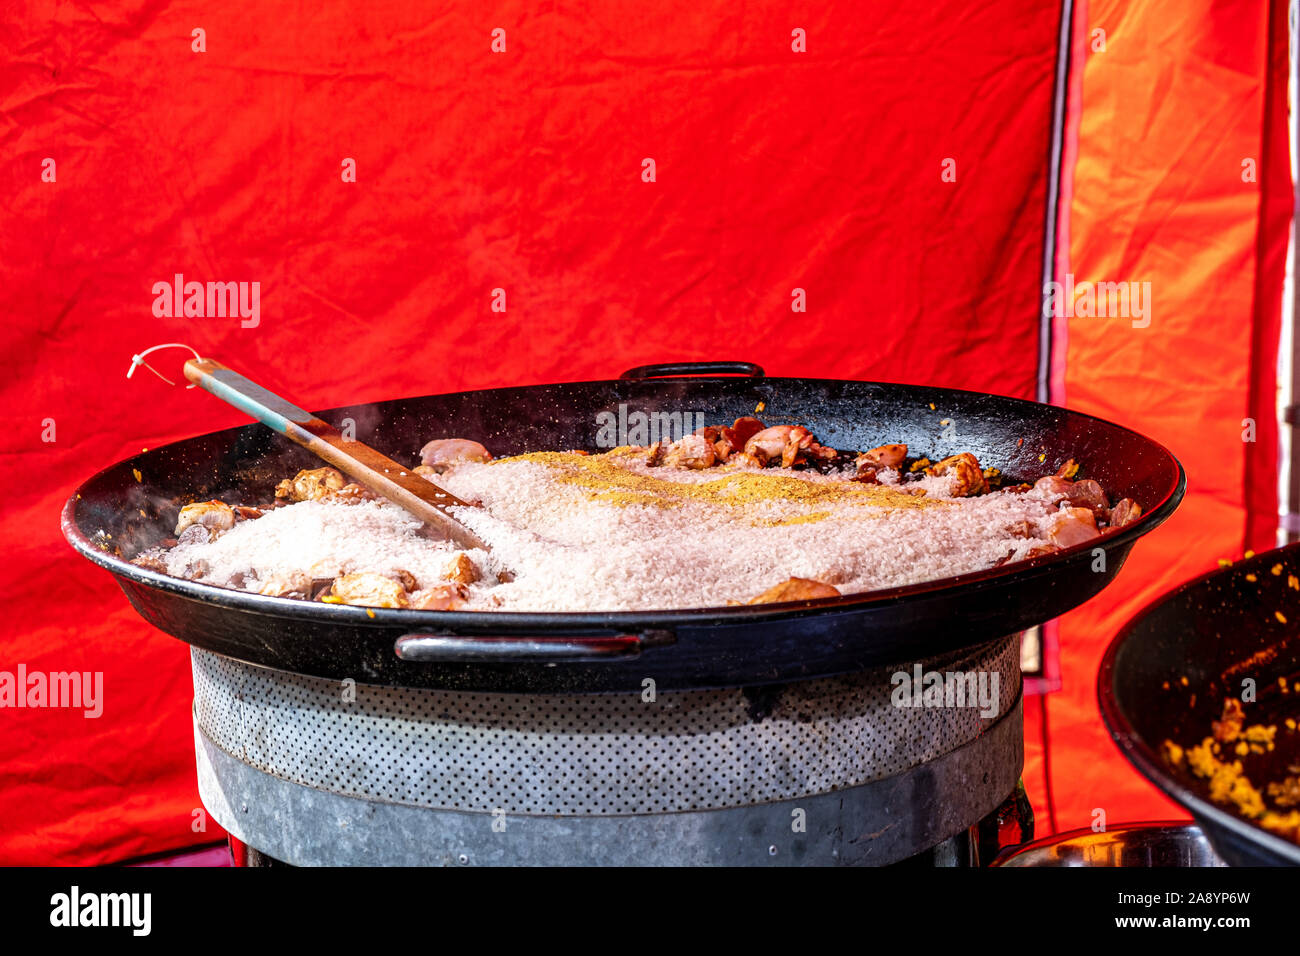 https://c8.alamy.com/comp/2A8YP6W/large-frying-pan-with-rice-and-chicken-meat-street-food-with-copy-space-2A8YP6W.jpg